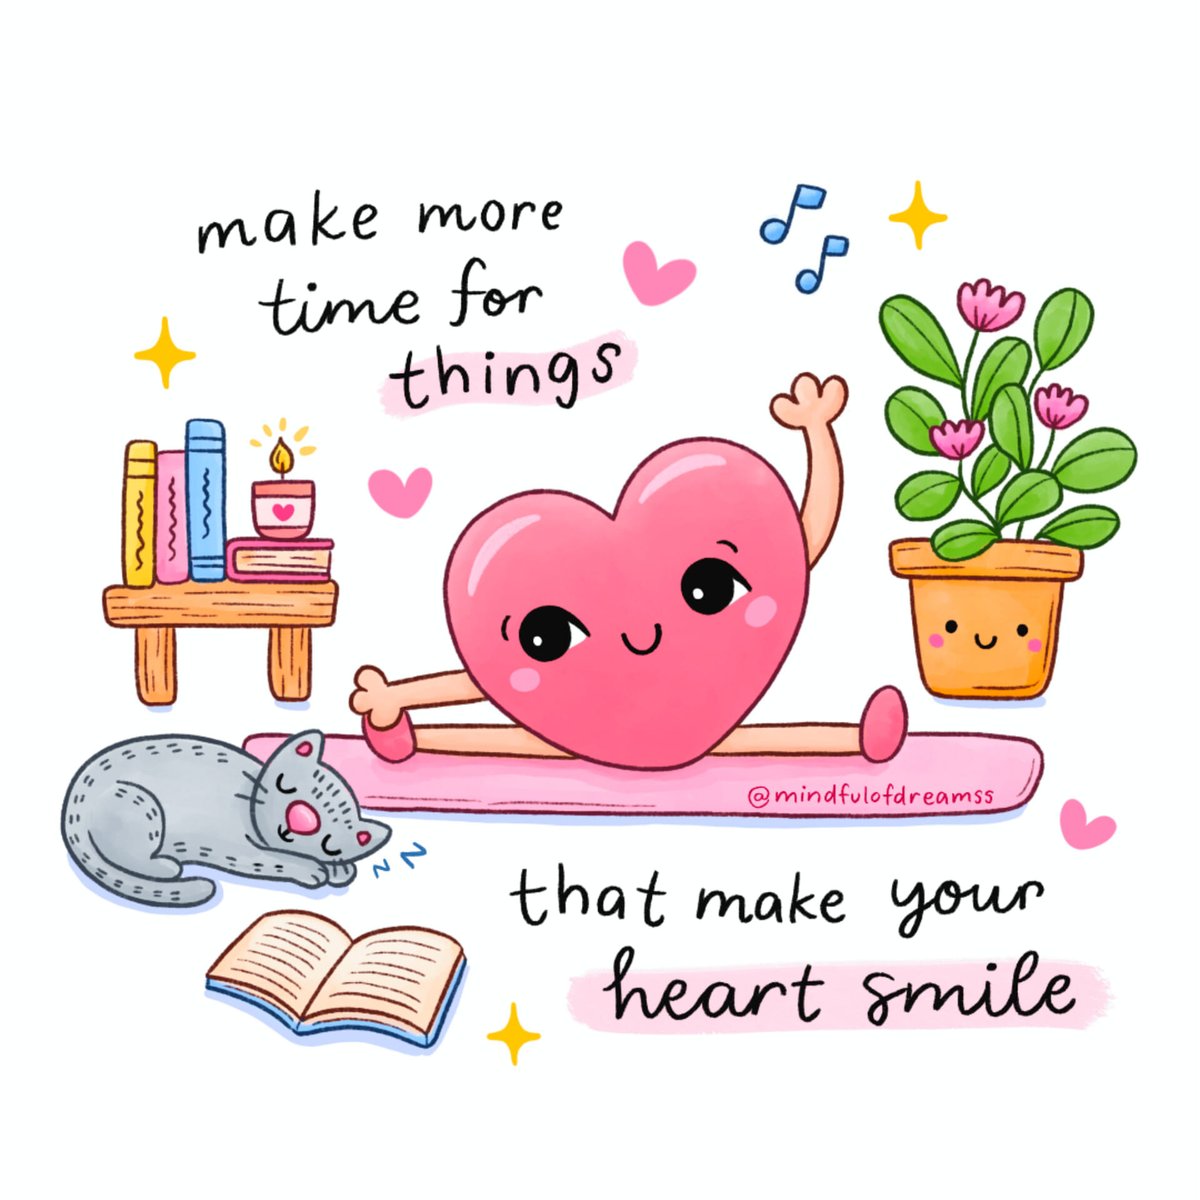 Make more time for things that make your heart smile.